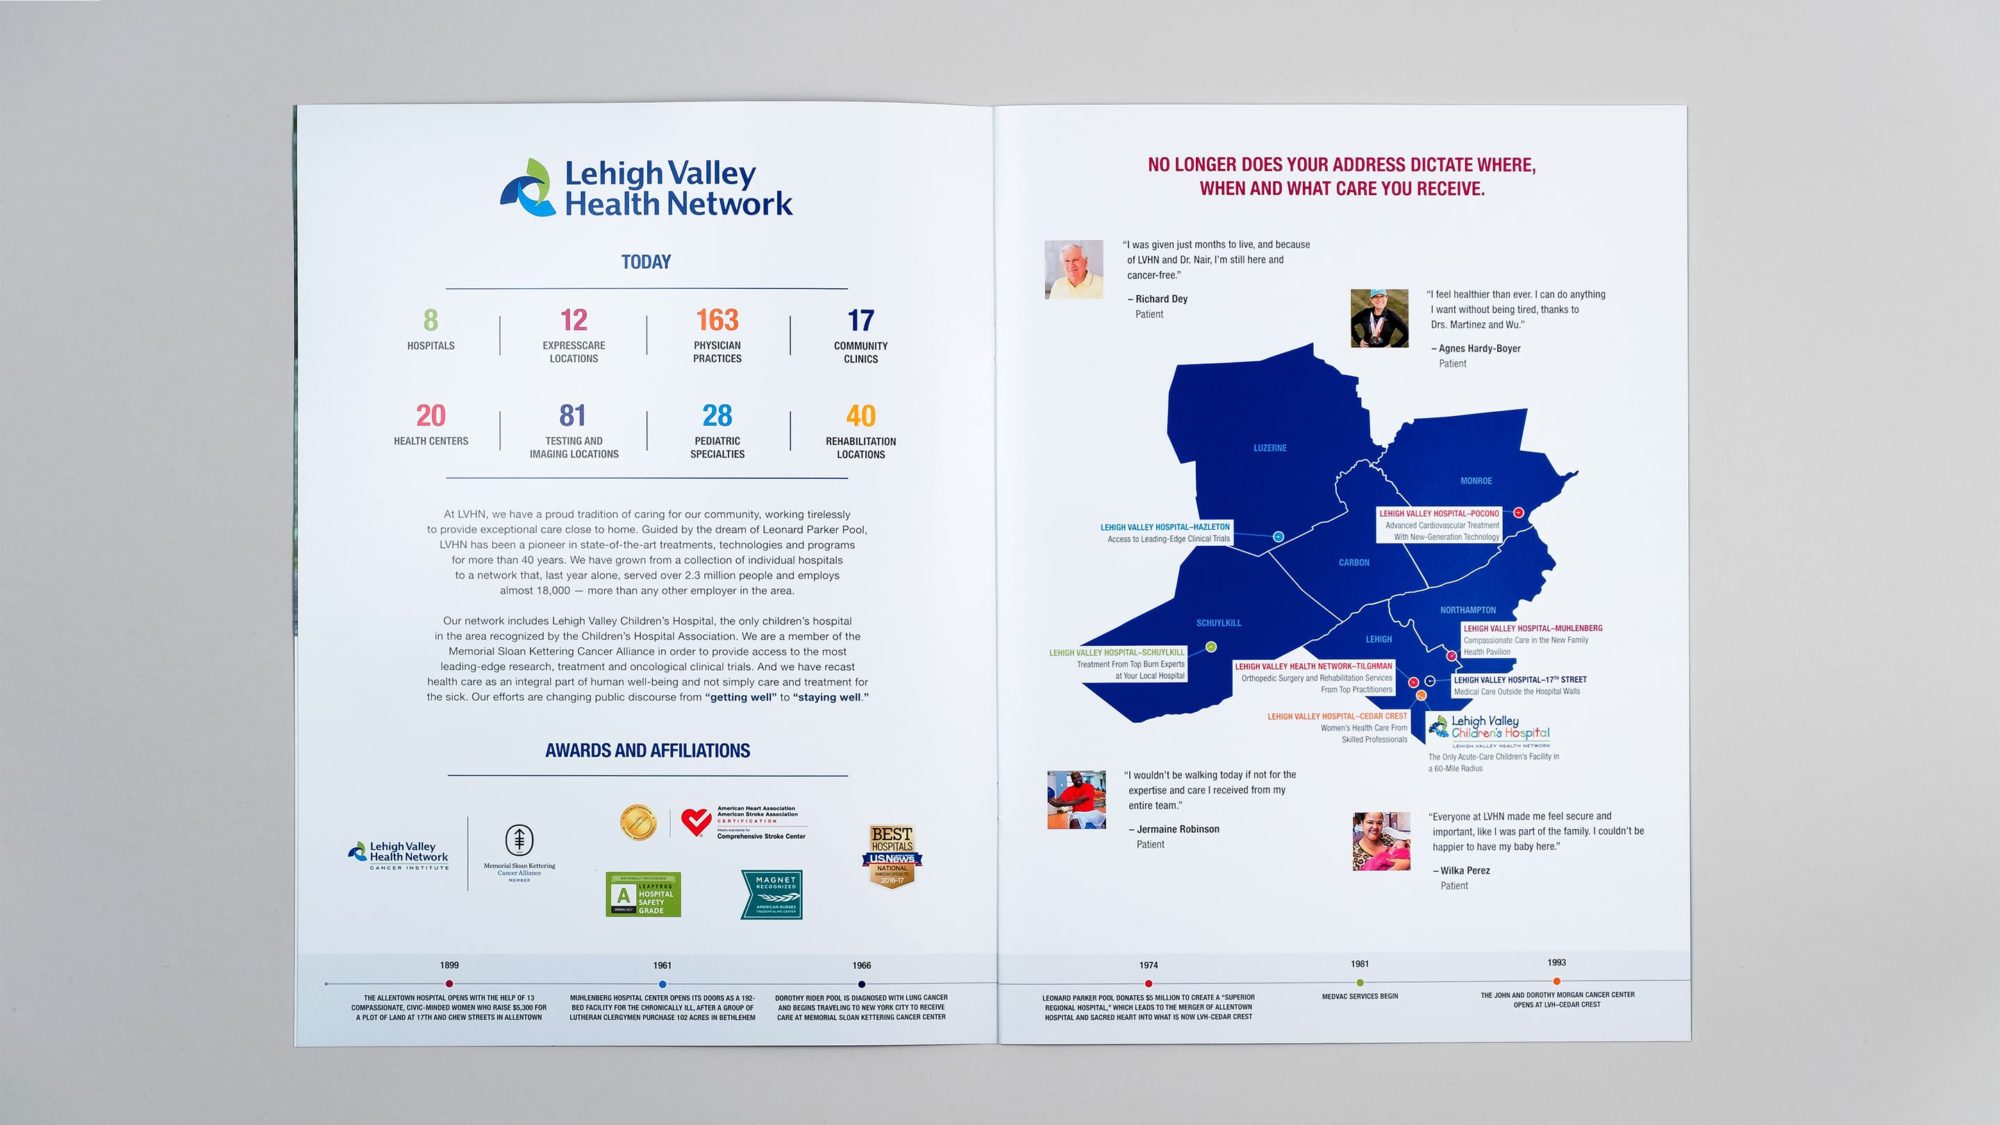 Interior spread showing infographic with stats on the network and a map of hospital locations